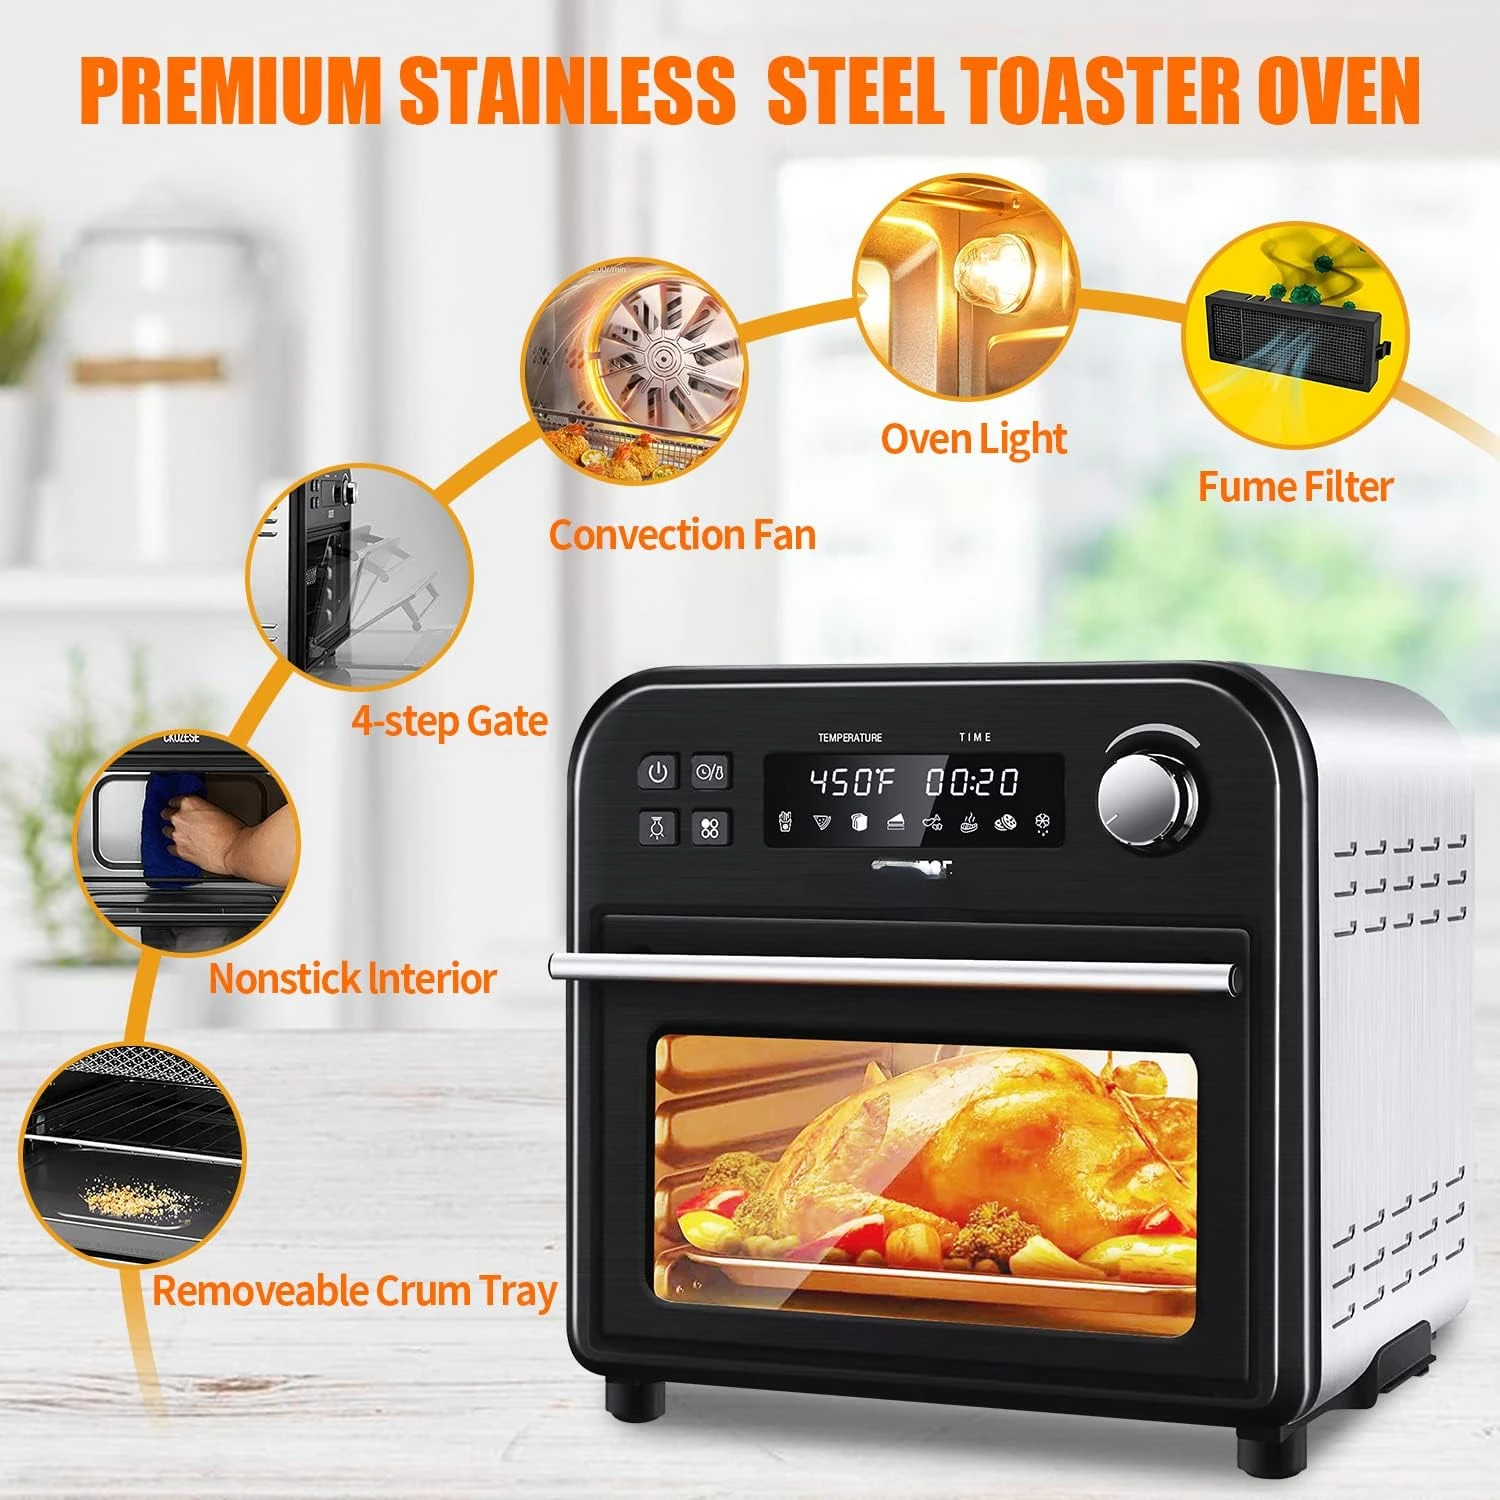 https://ae01.alicdn.com/kf/S4461e9ad0e5e489d9feeb930044cf7aeG/8-In-1-Smart-Toaster-Oven-Air-Fryer-Combo-6-Slice-Compact-Toaster-Ovens-Countertop-6.jpg